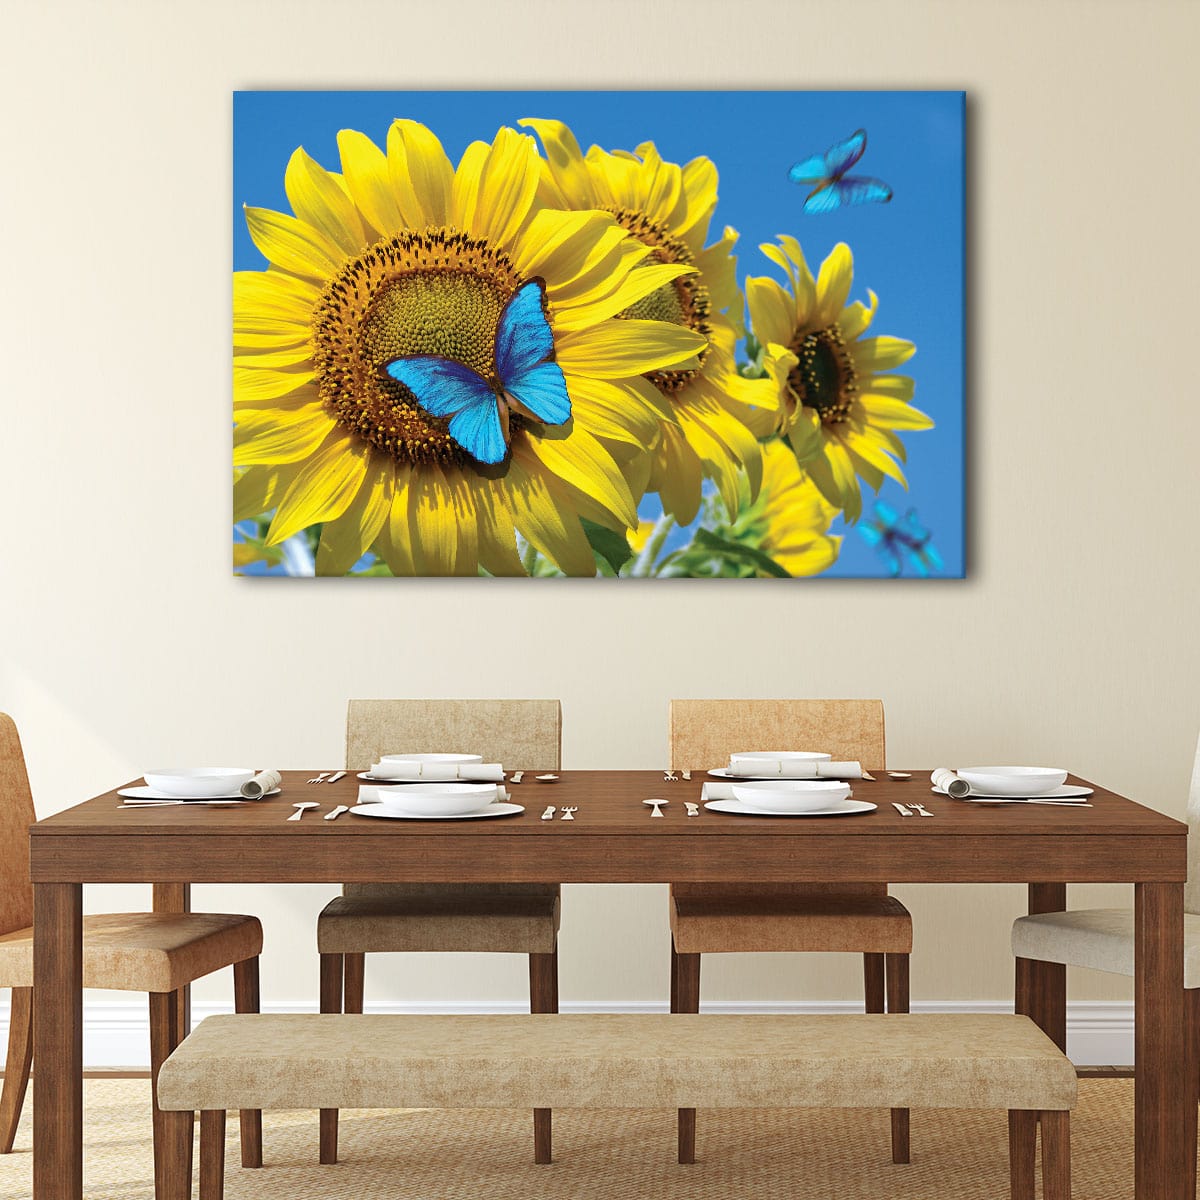 1pc Sunflower Picture Canvas Print, Sunflower Poster, Sunflowers